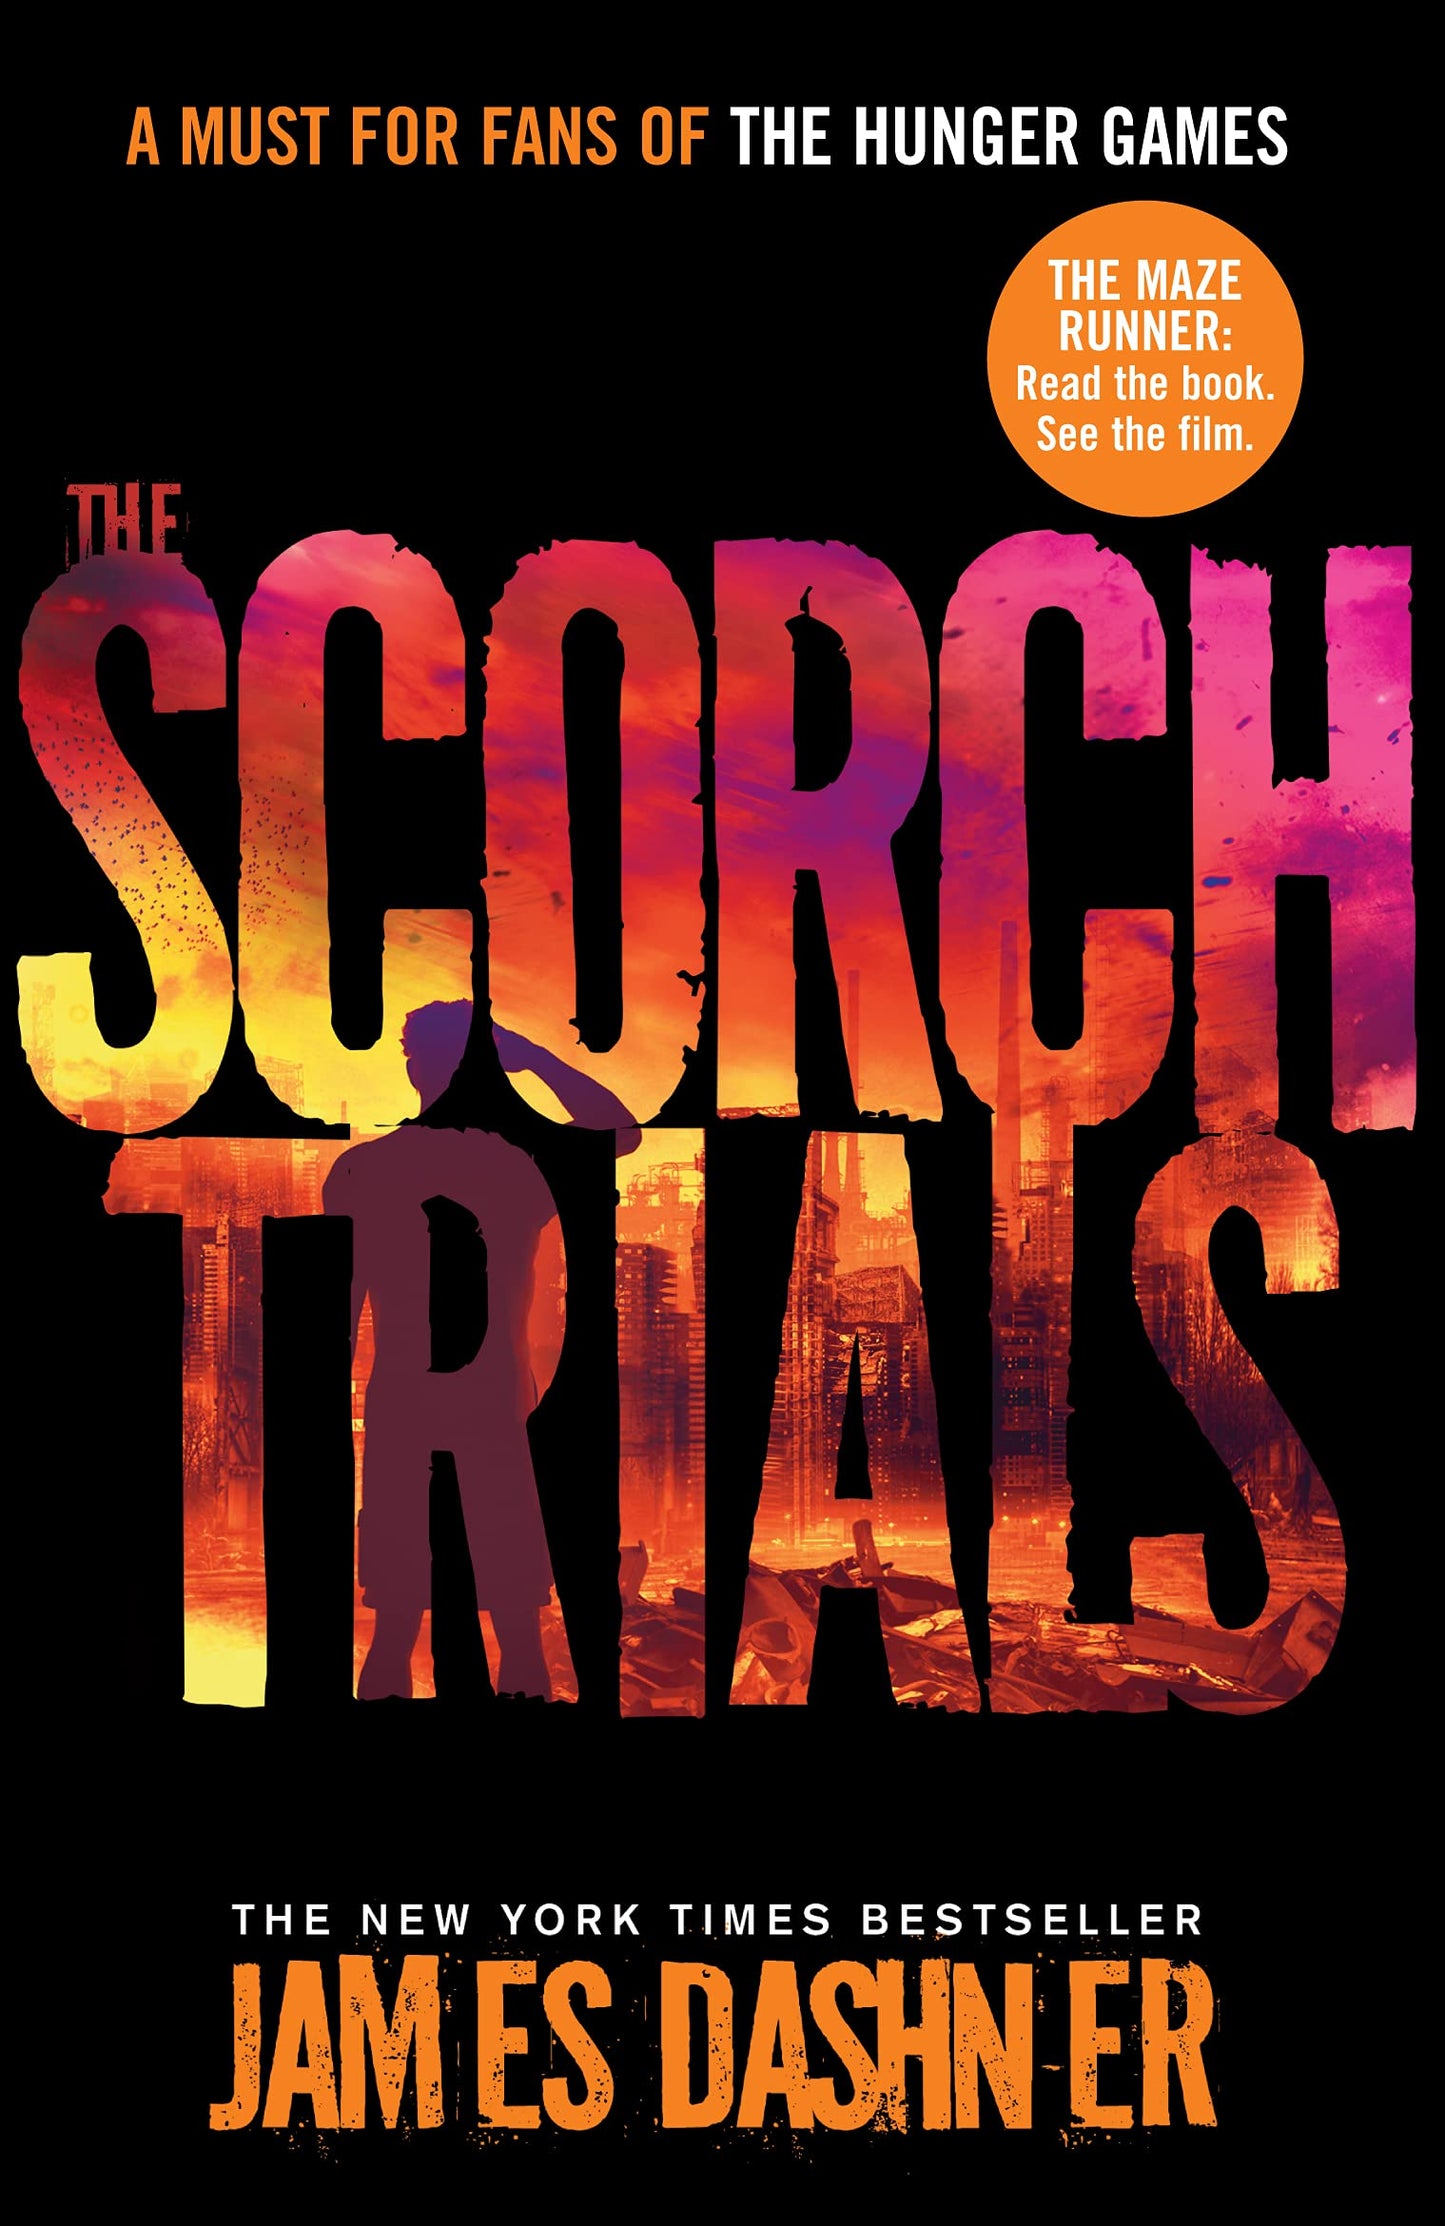 The Scorch Trials By James Dashner (Paperback)